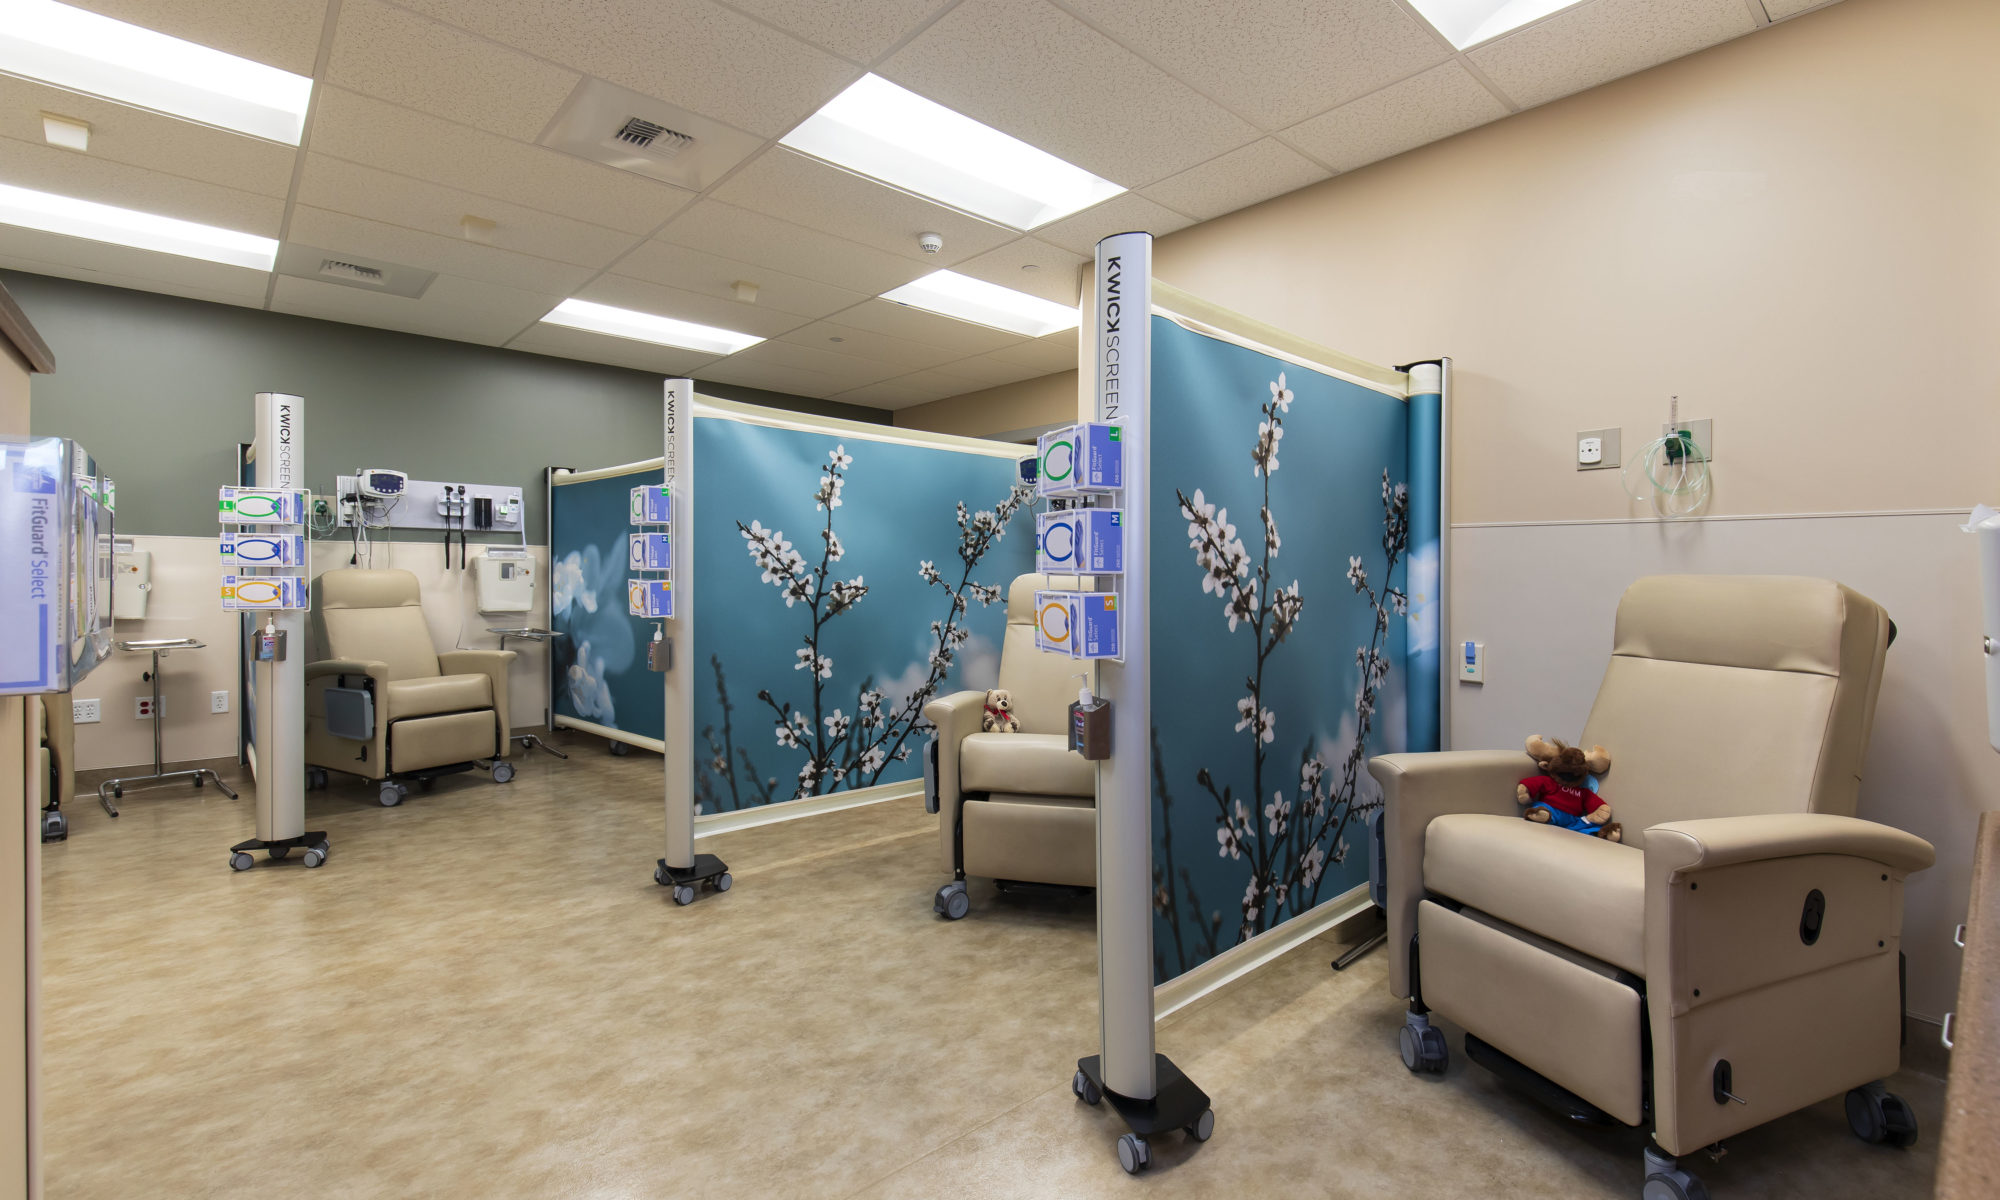 Carson Tahoe Health’s Emergency Department Reimagined